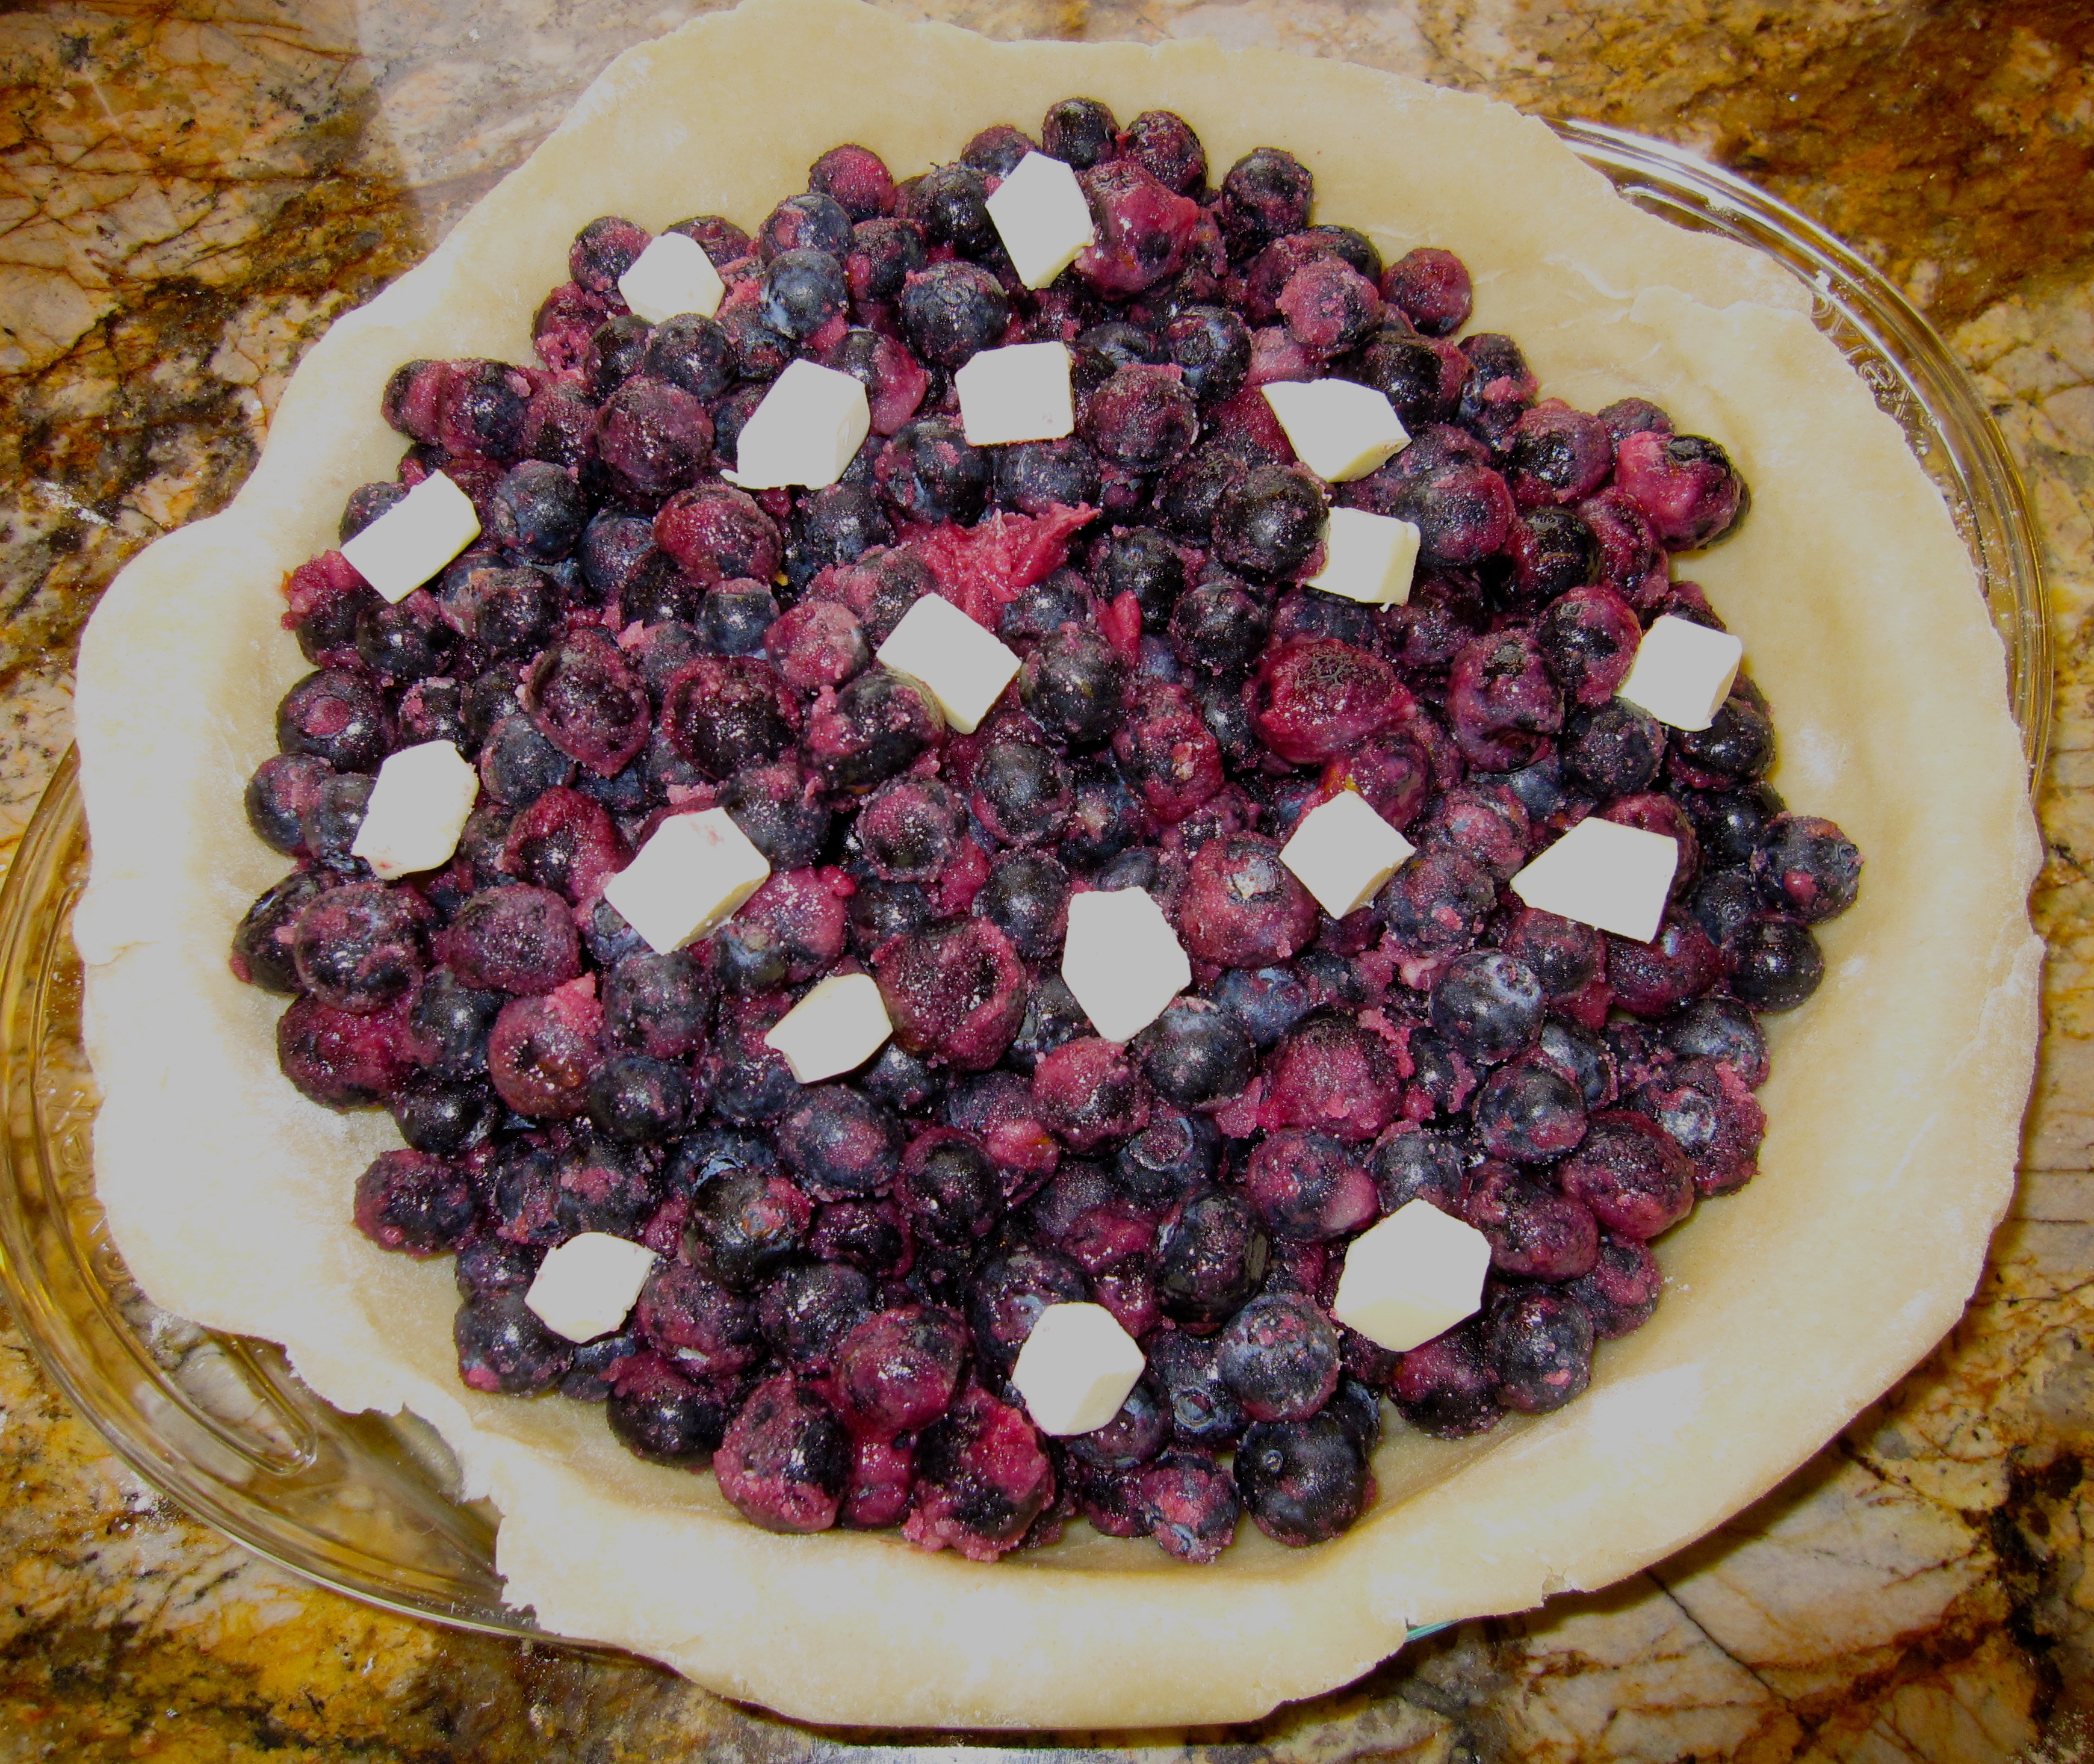 Blueberries and butter in unbaked pie shell.